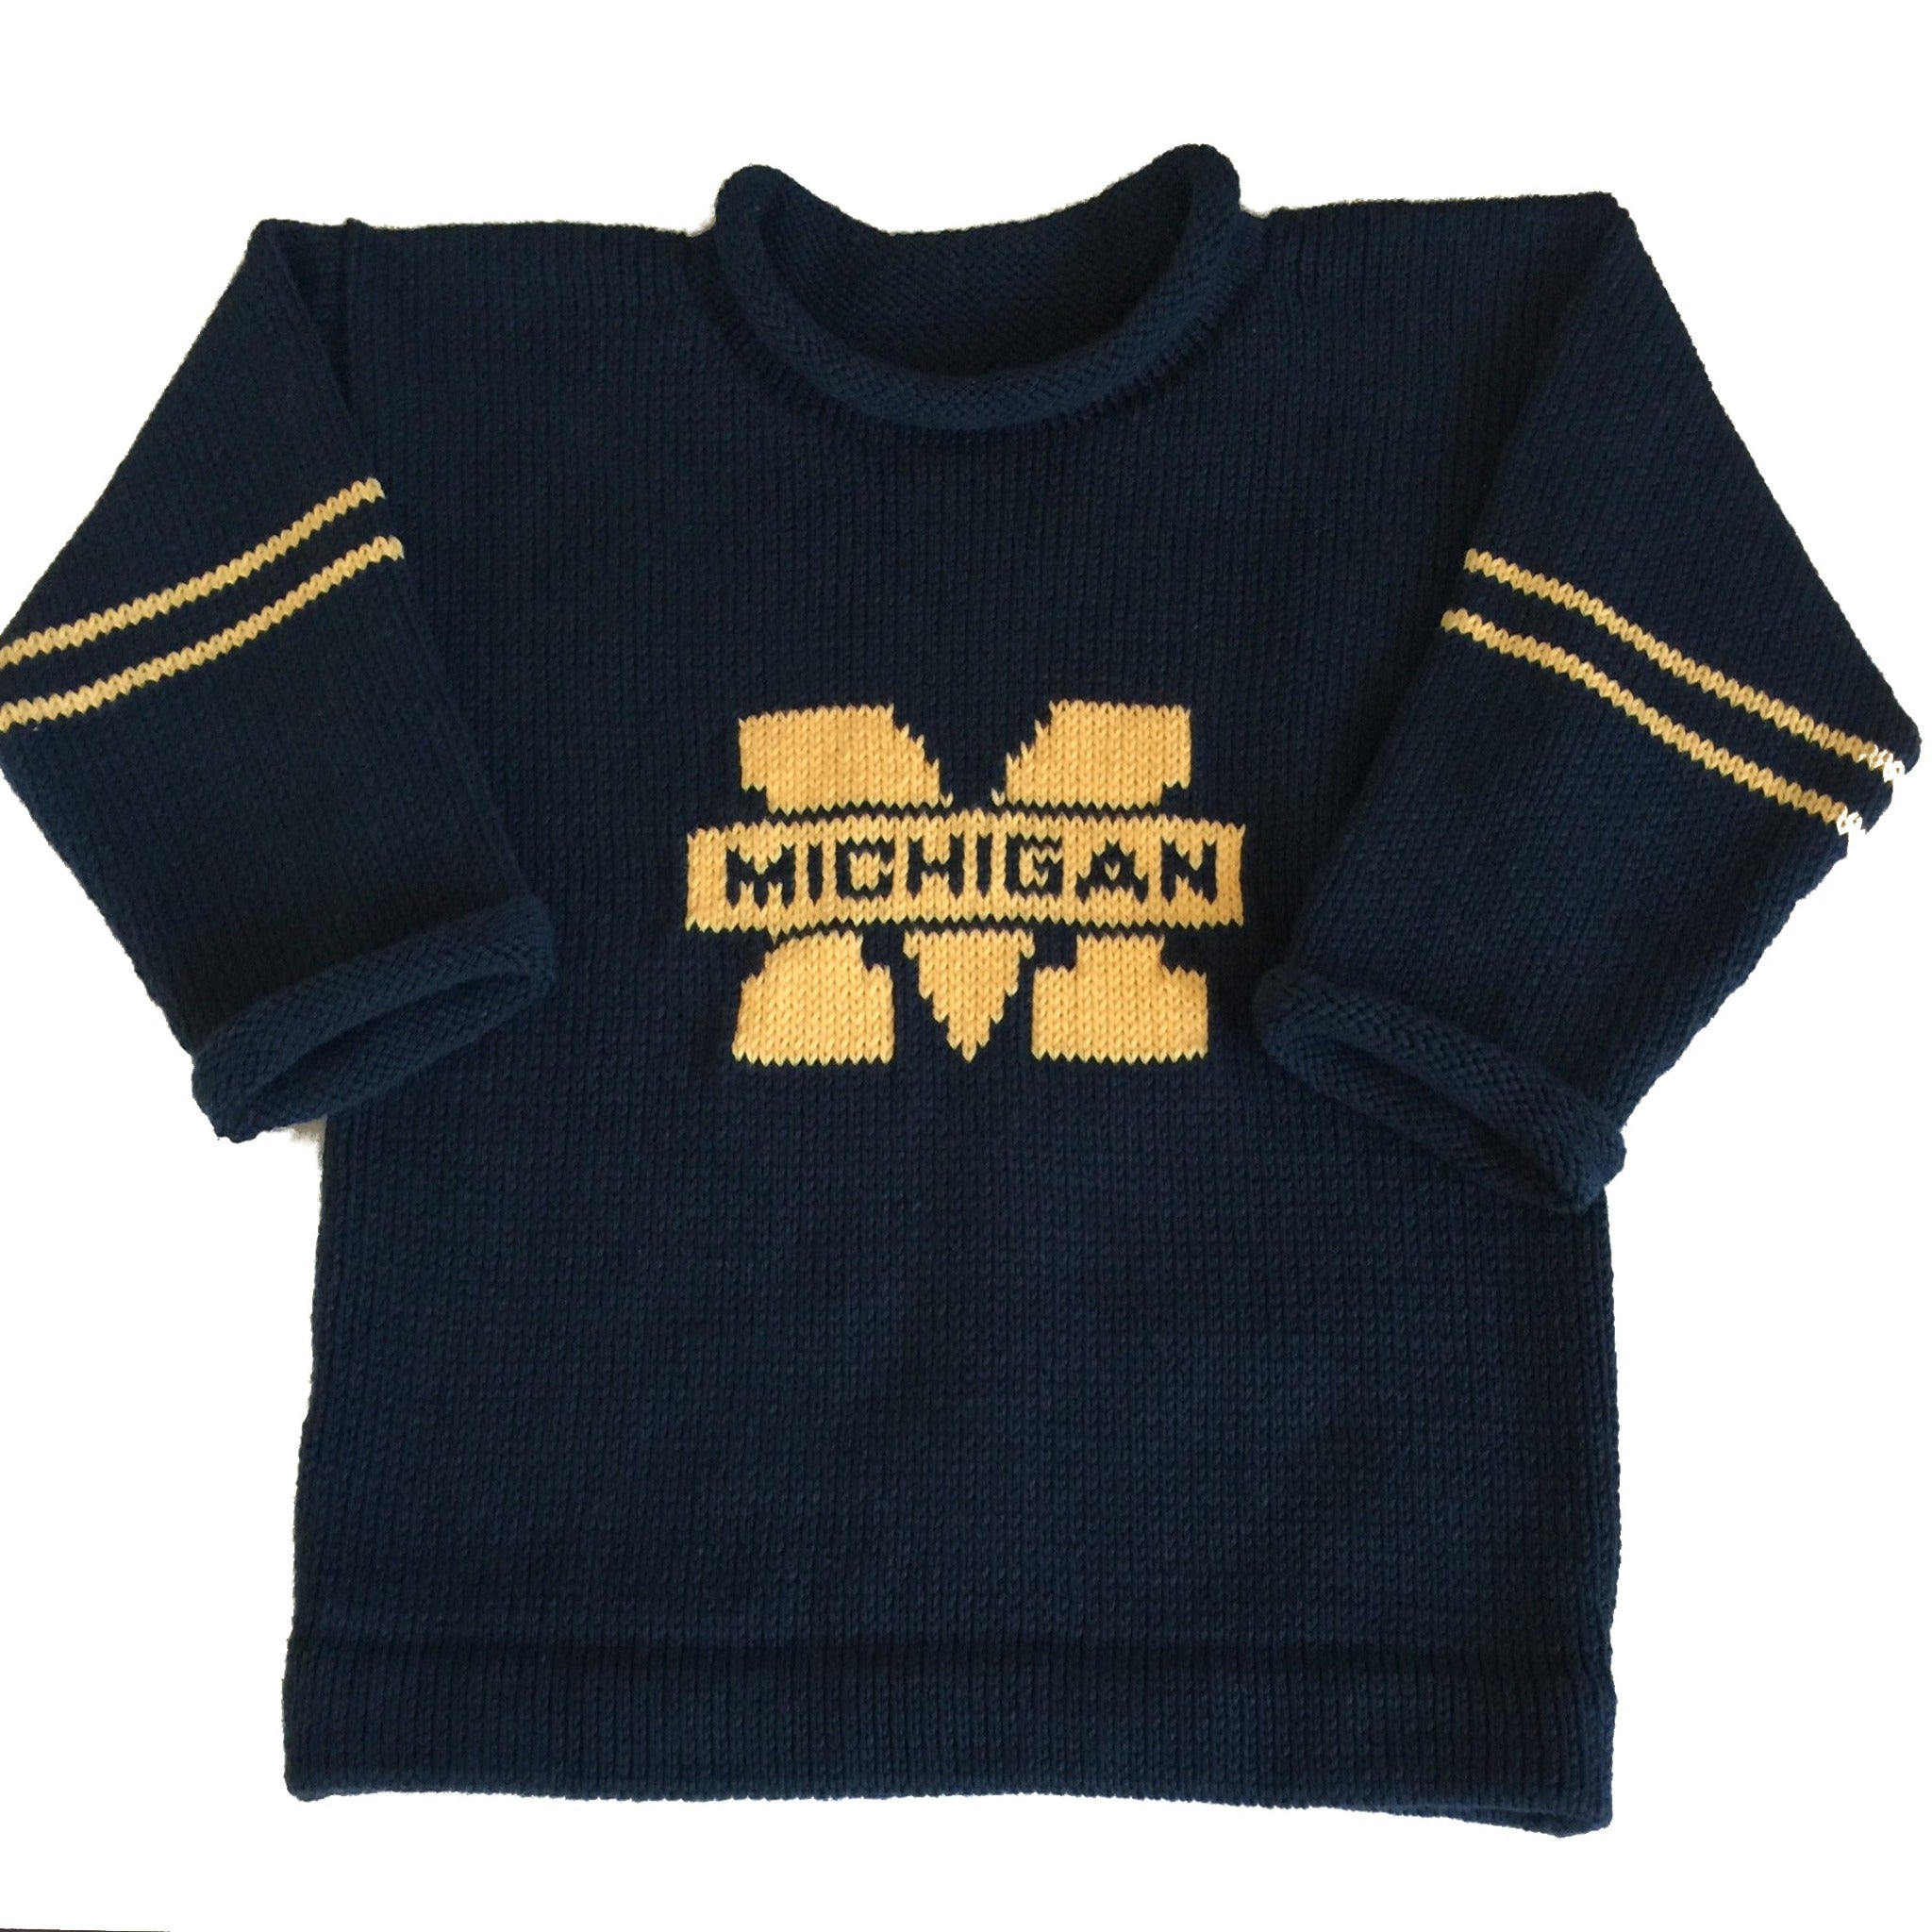 Personalized Alumni Sweaters - Custom Knits for Baby